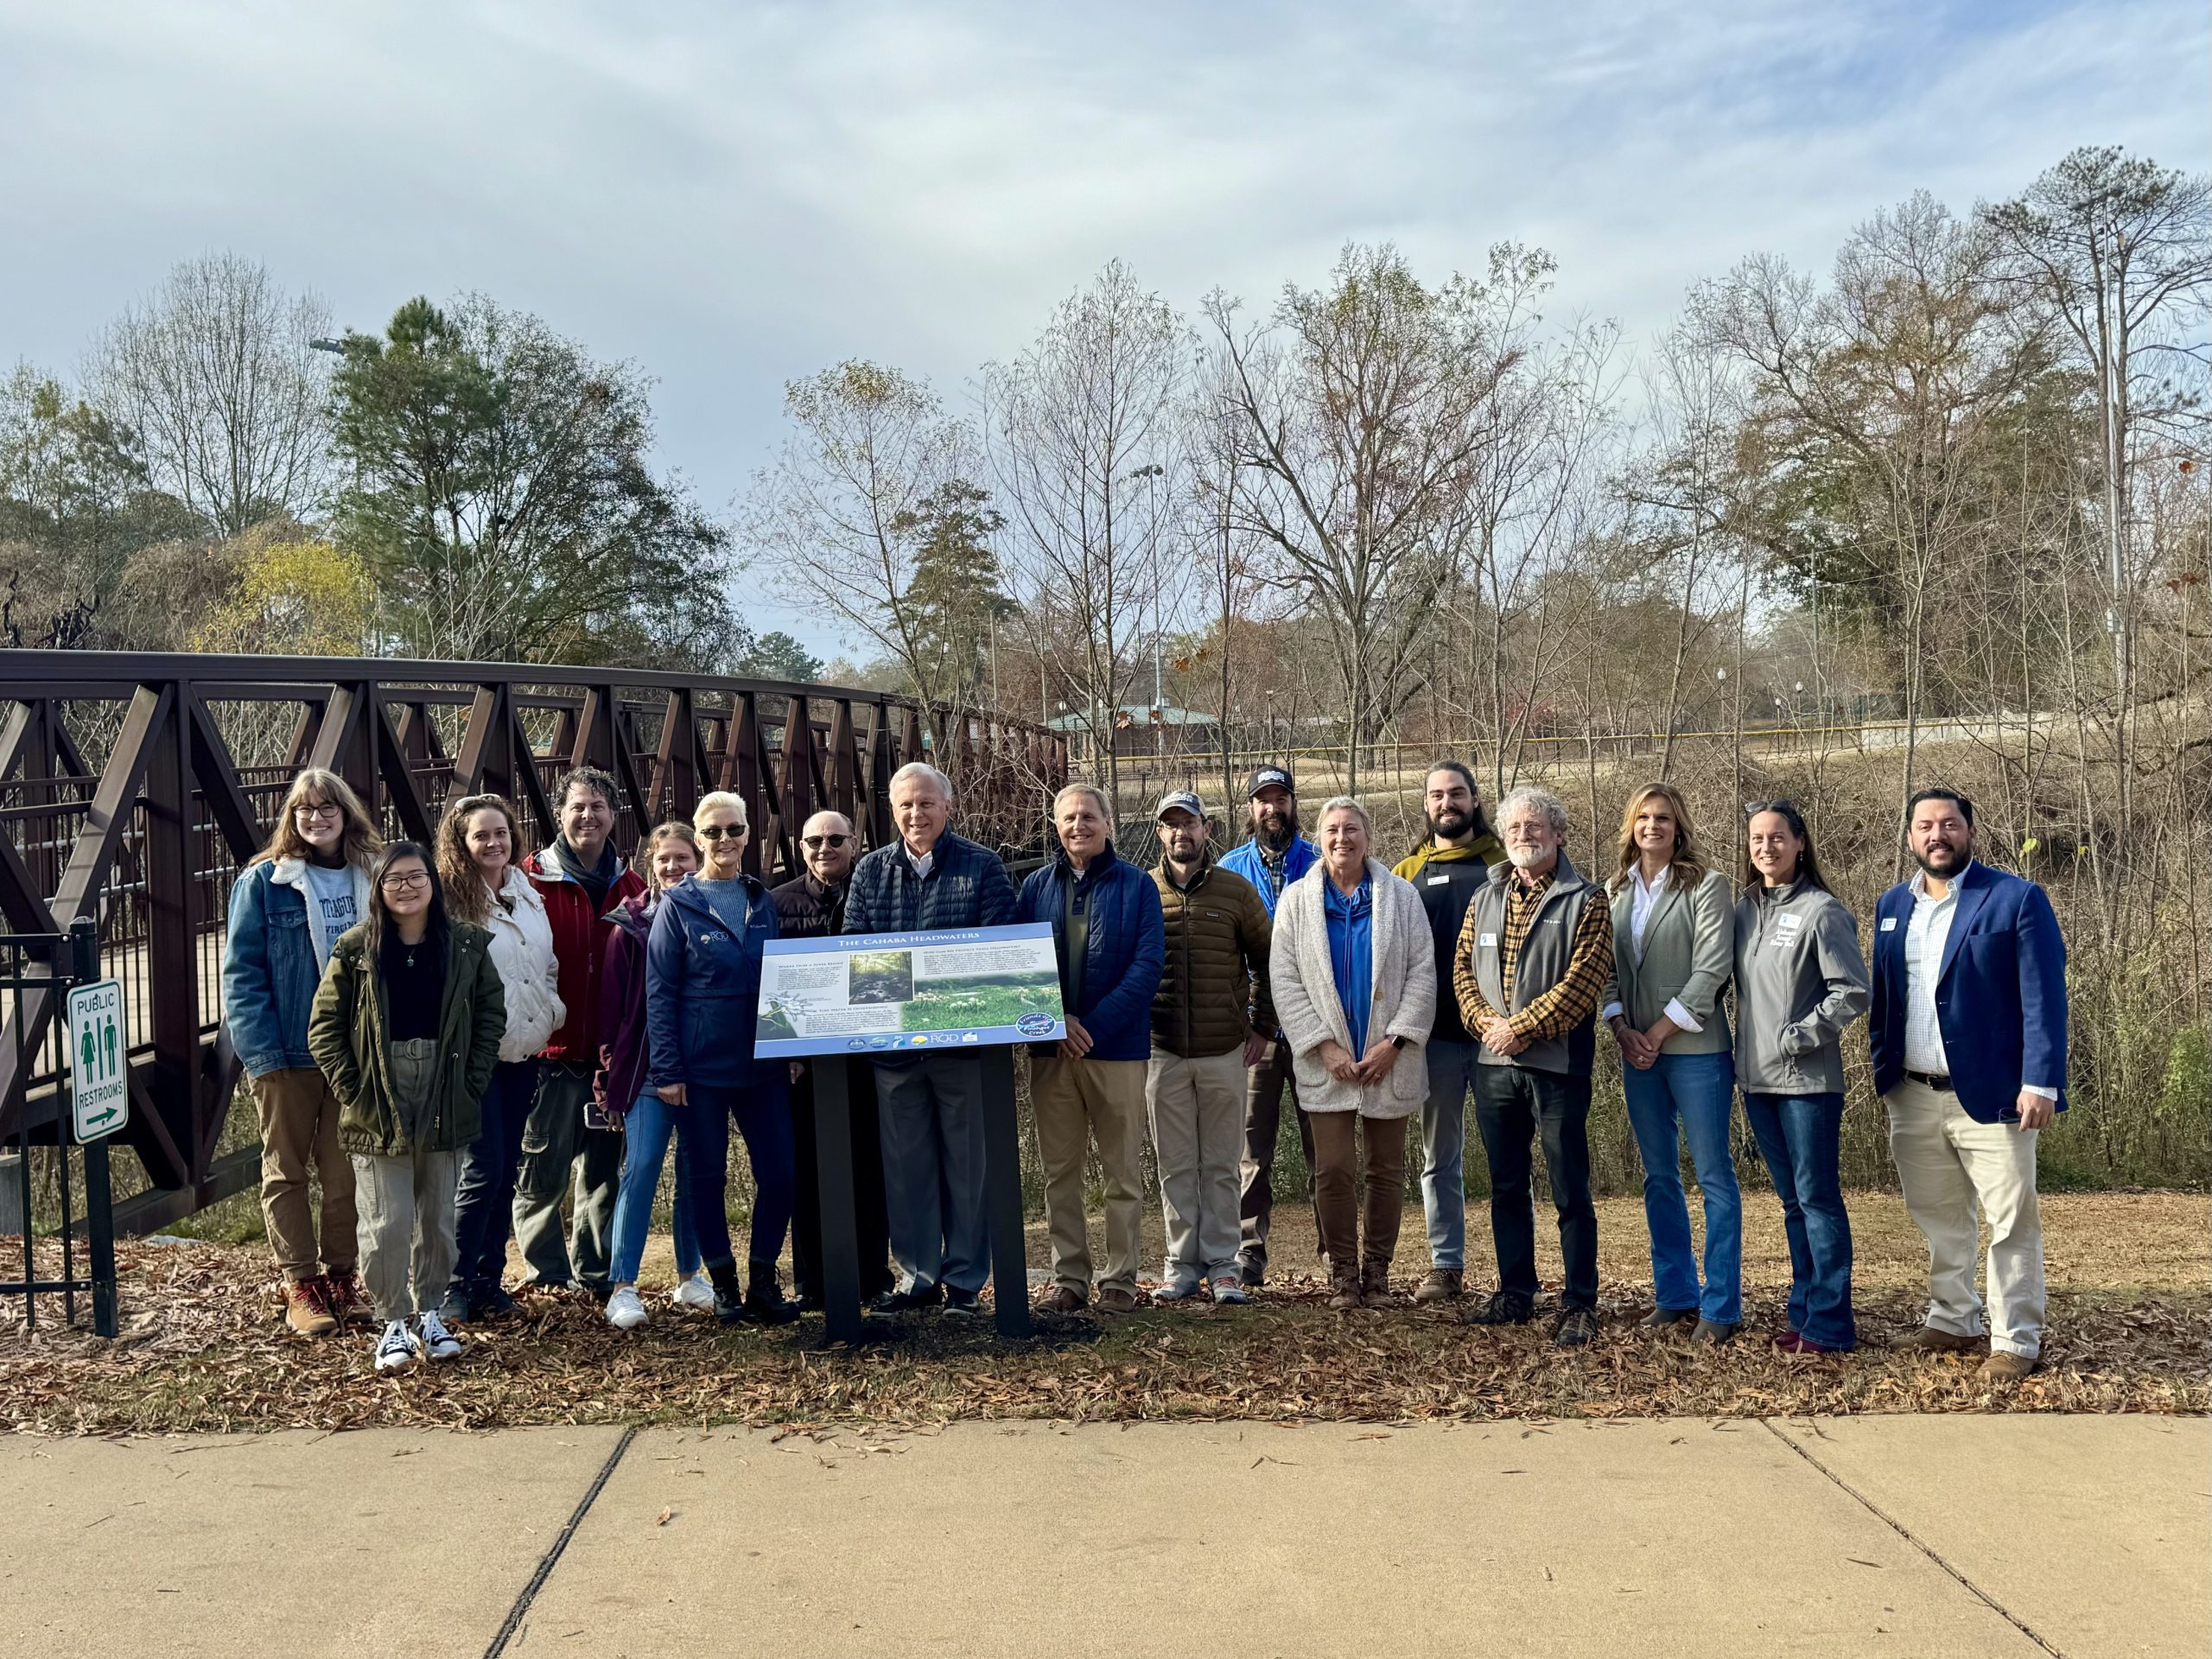 Friends of Pinchgut Creek unveiled informative signs along the Cahaba River, Pinchgut Creek in Trussville on Thursday